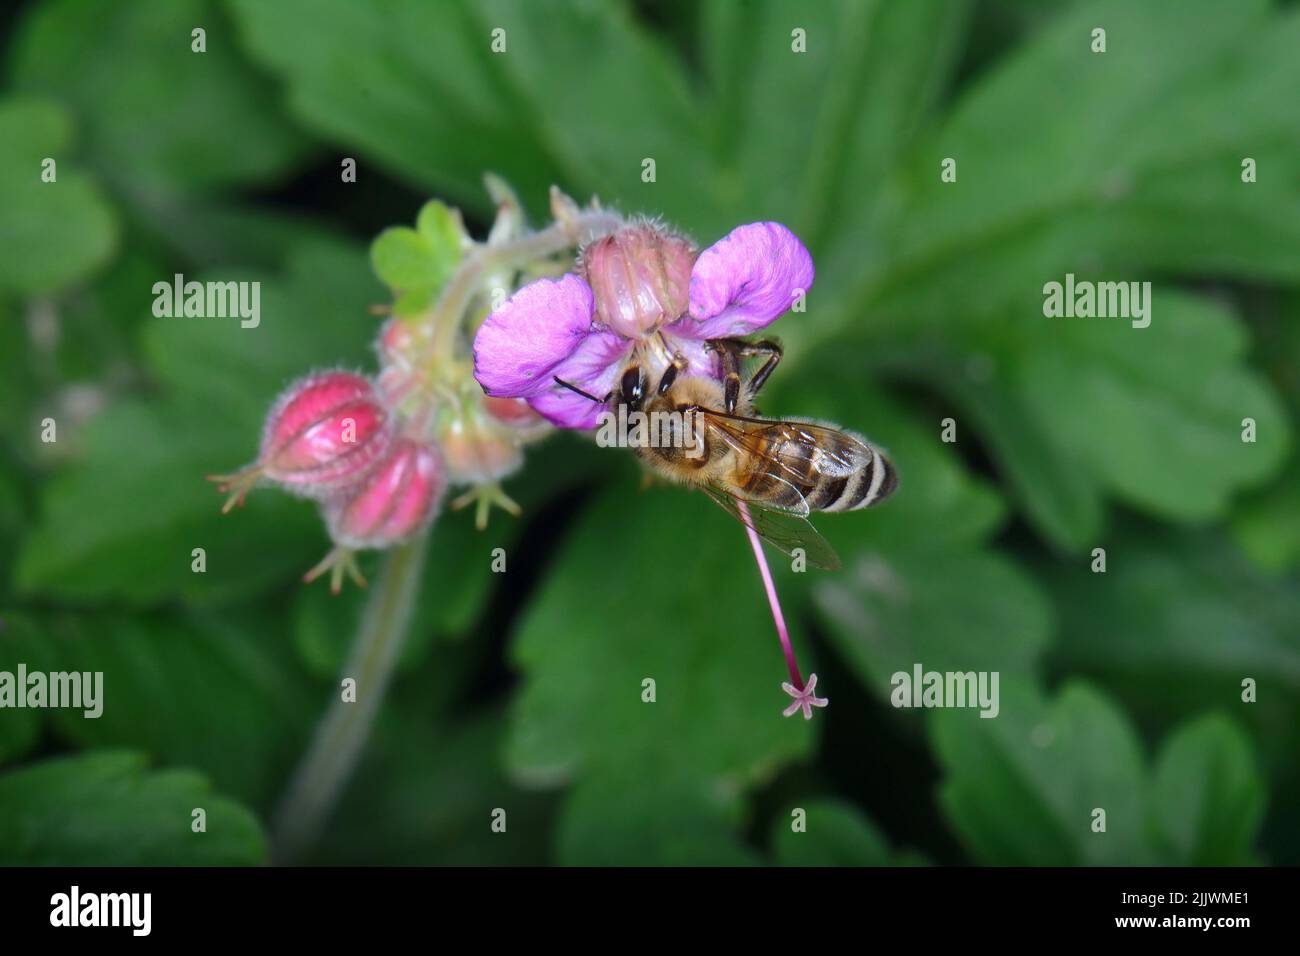 A macro shot of a bee collecting pollen from a Hardy geranium bloom. Rock Cranes-Bill, Hardy Geranium, Wild Geranium 'Czakor' (Geranium macrorrhizum) Stock Photo